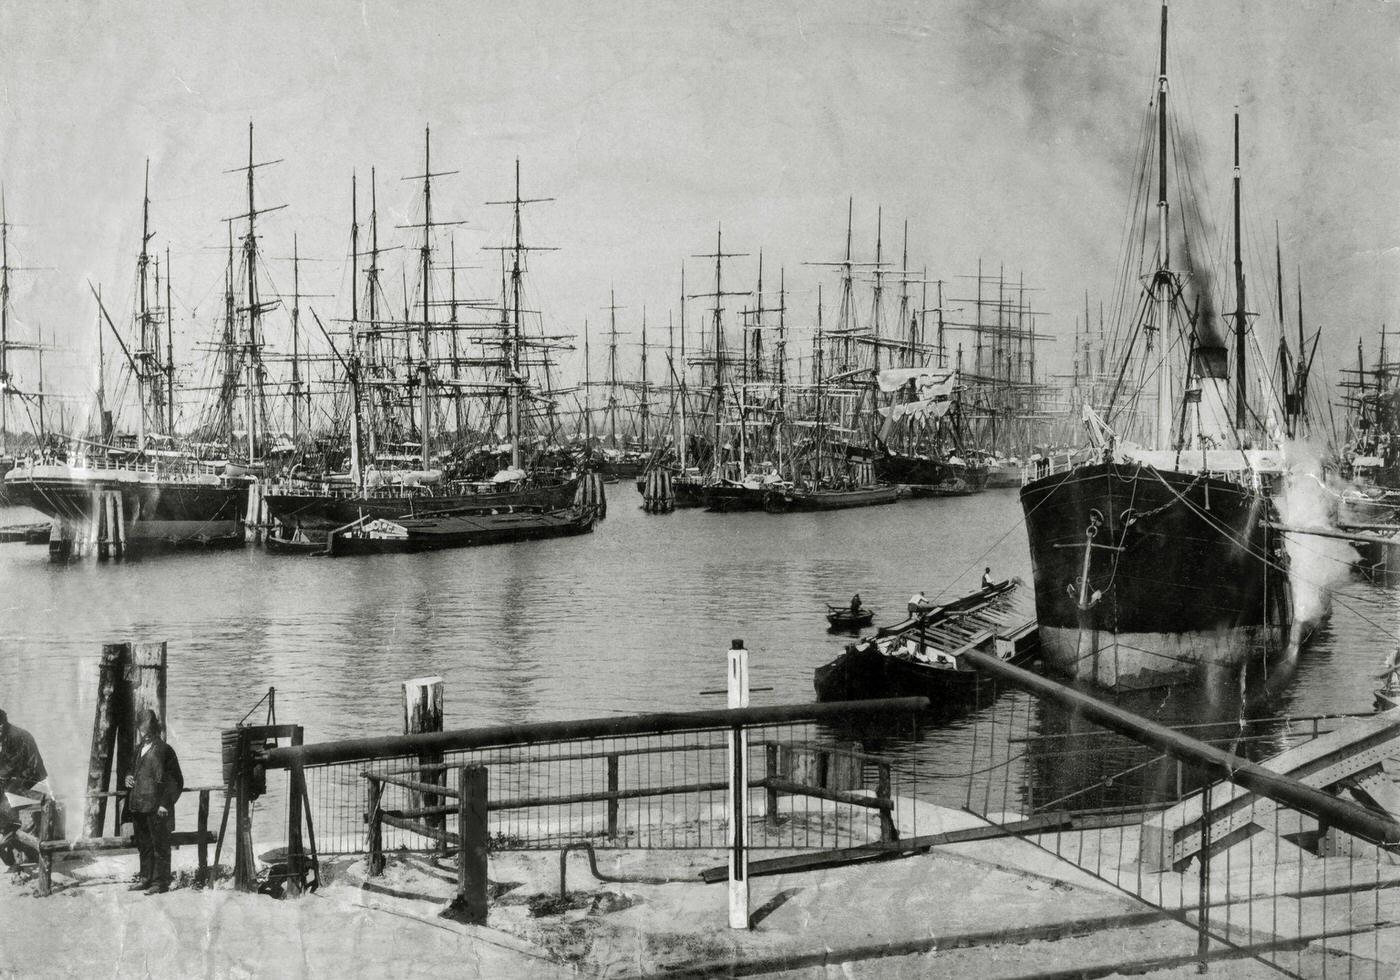 Sailing vessels in the port of Hamburg, Germany, 1910